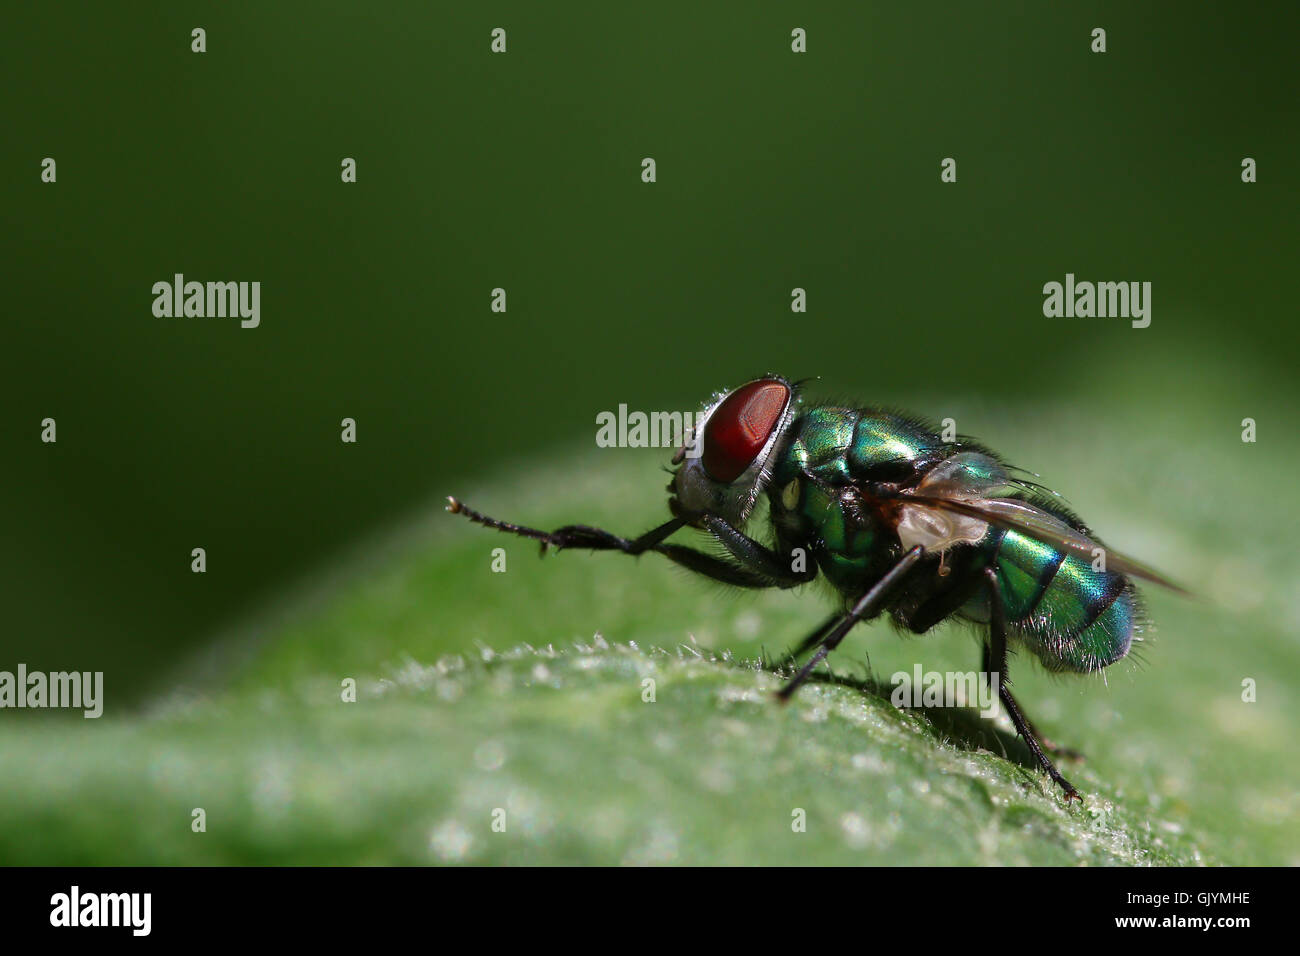 Green fly with red eyes on a green leaf Stock Photo